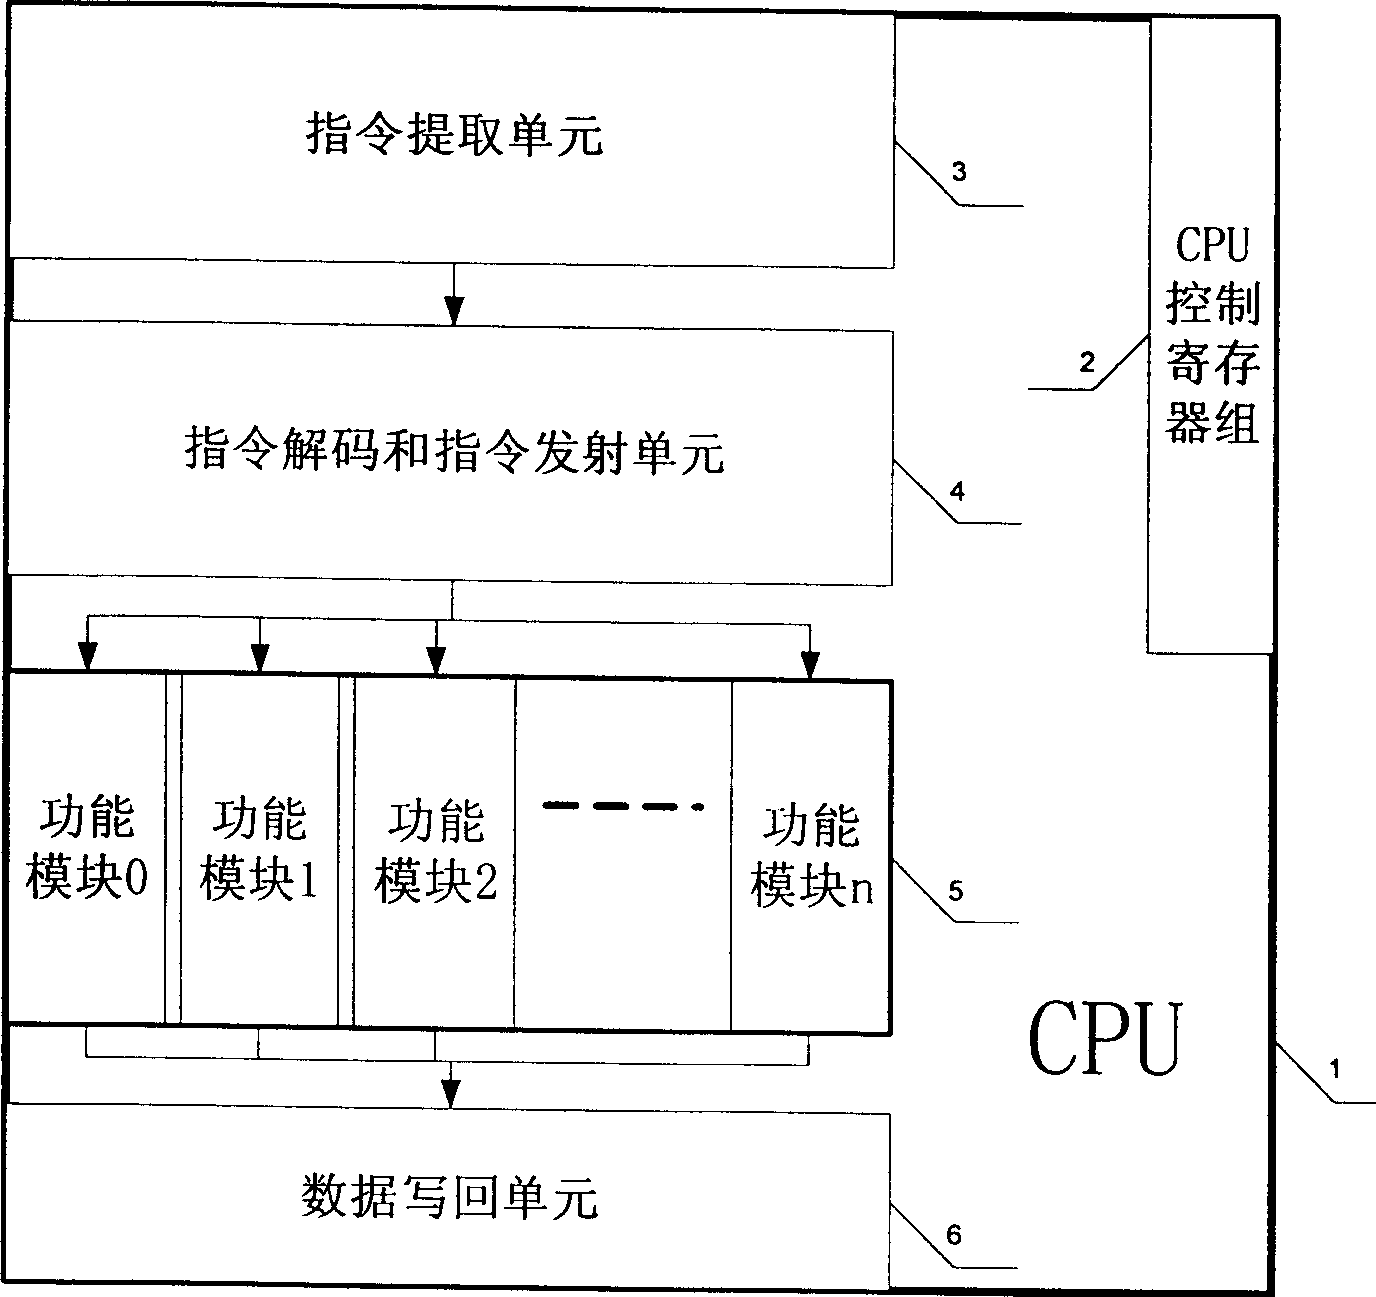 Analytical method designed in CPU for preventing linearity and differentiate power consumption